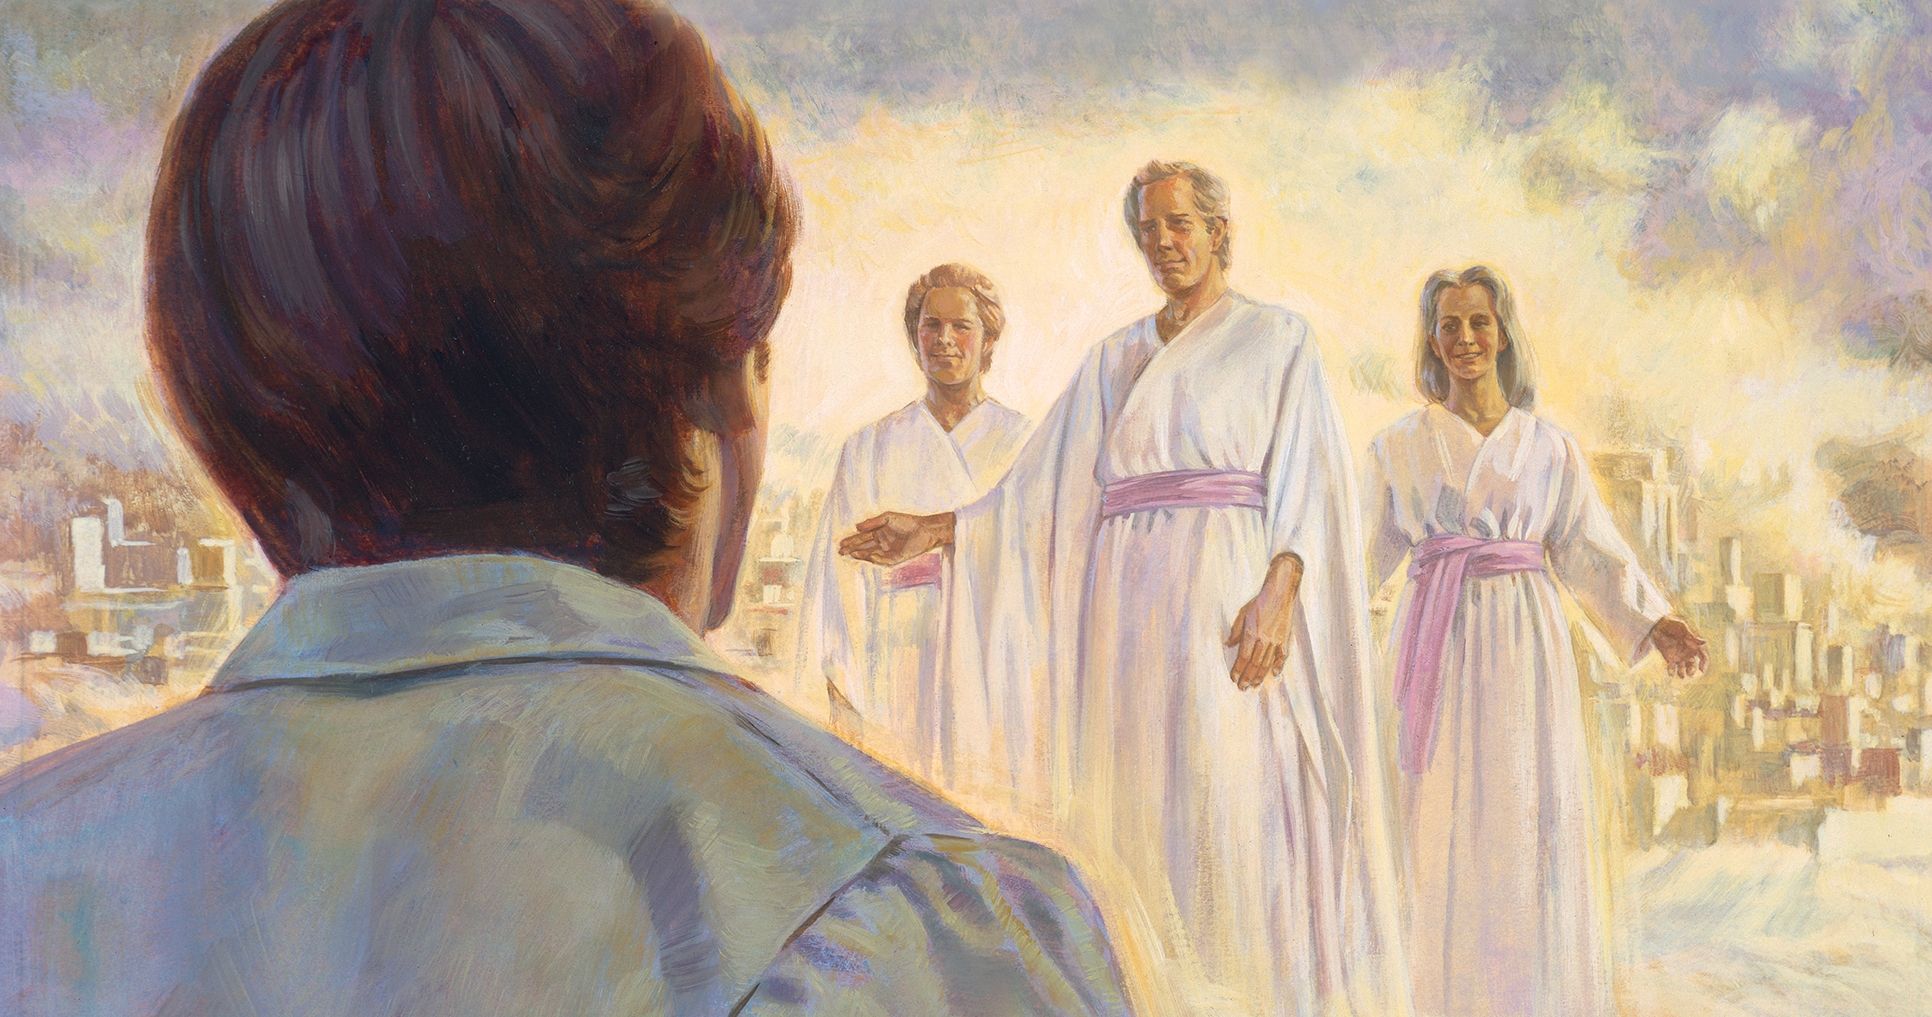 Joseph sees his father, mother, and brother in the celestial kingdom. Joseph Smith’s Vision of the Celestial Kingdom, by Robert T. Barrett. Image via Church of Jesus Christ.